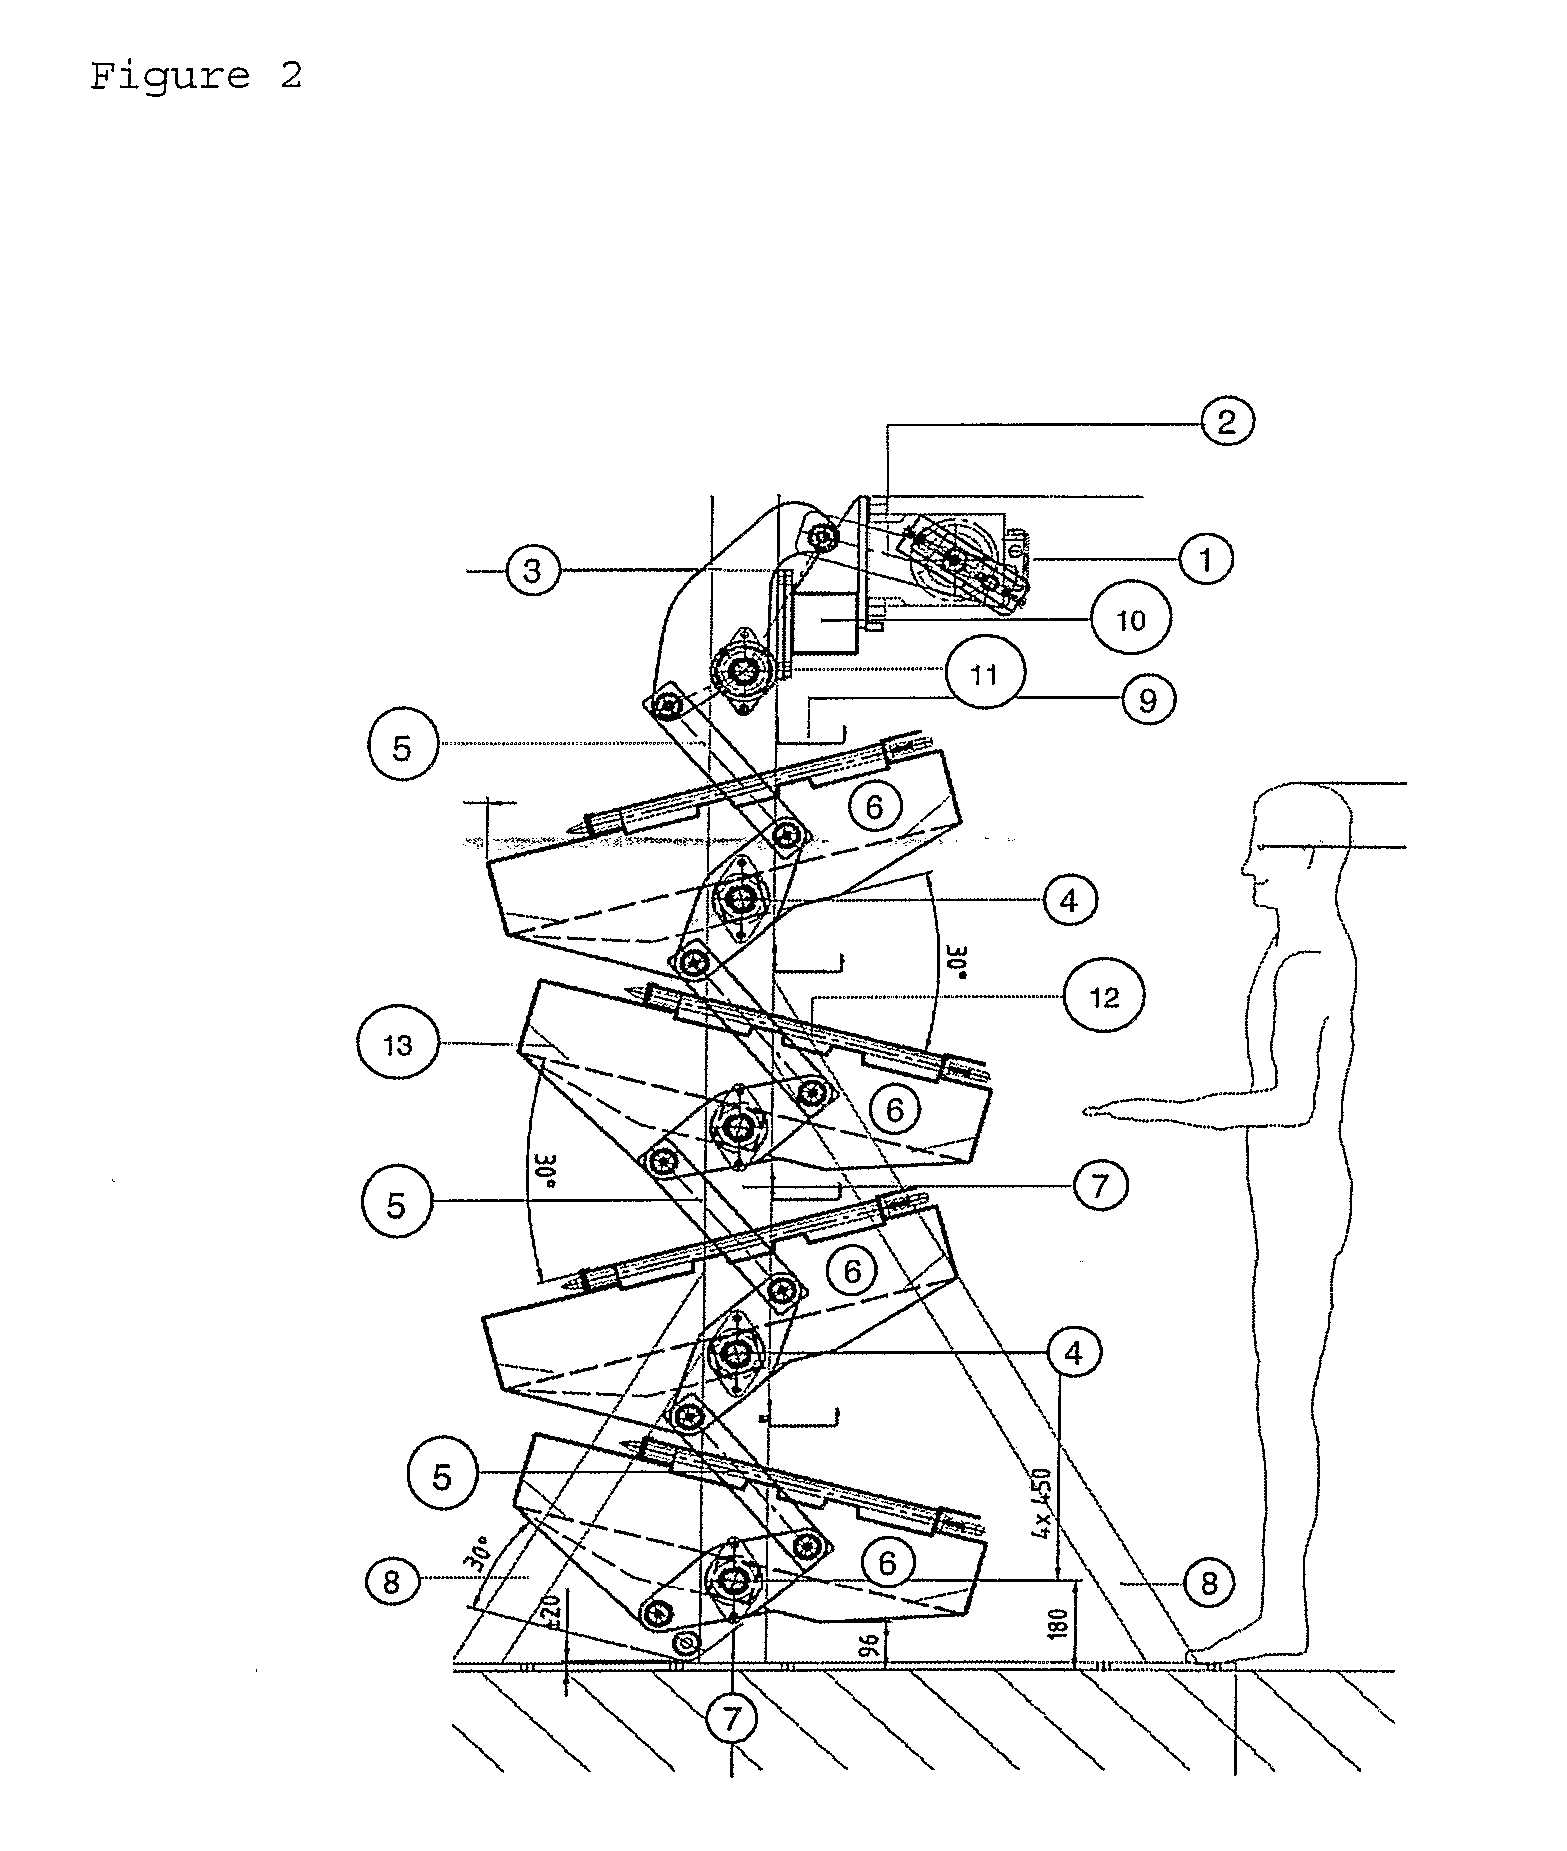 Bioreactor Assembly Comprising at Least One Tray-Like Rocking Platform